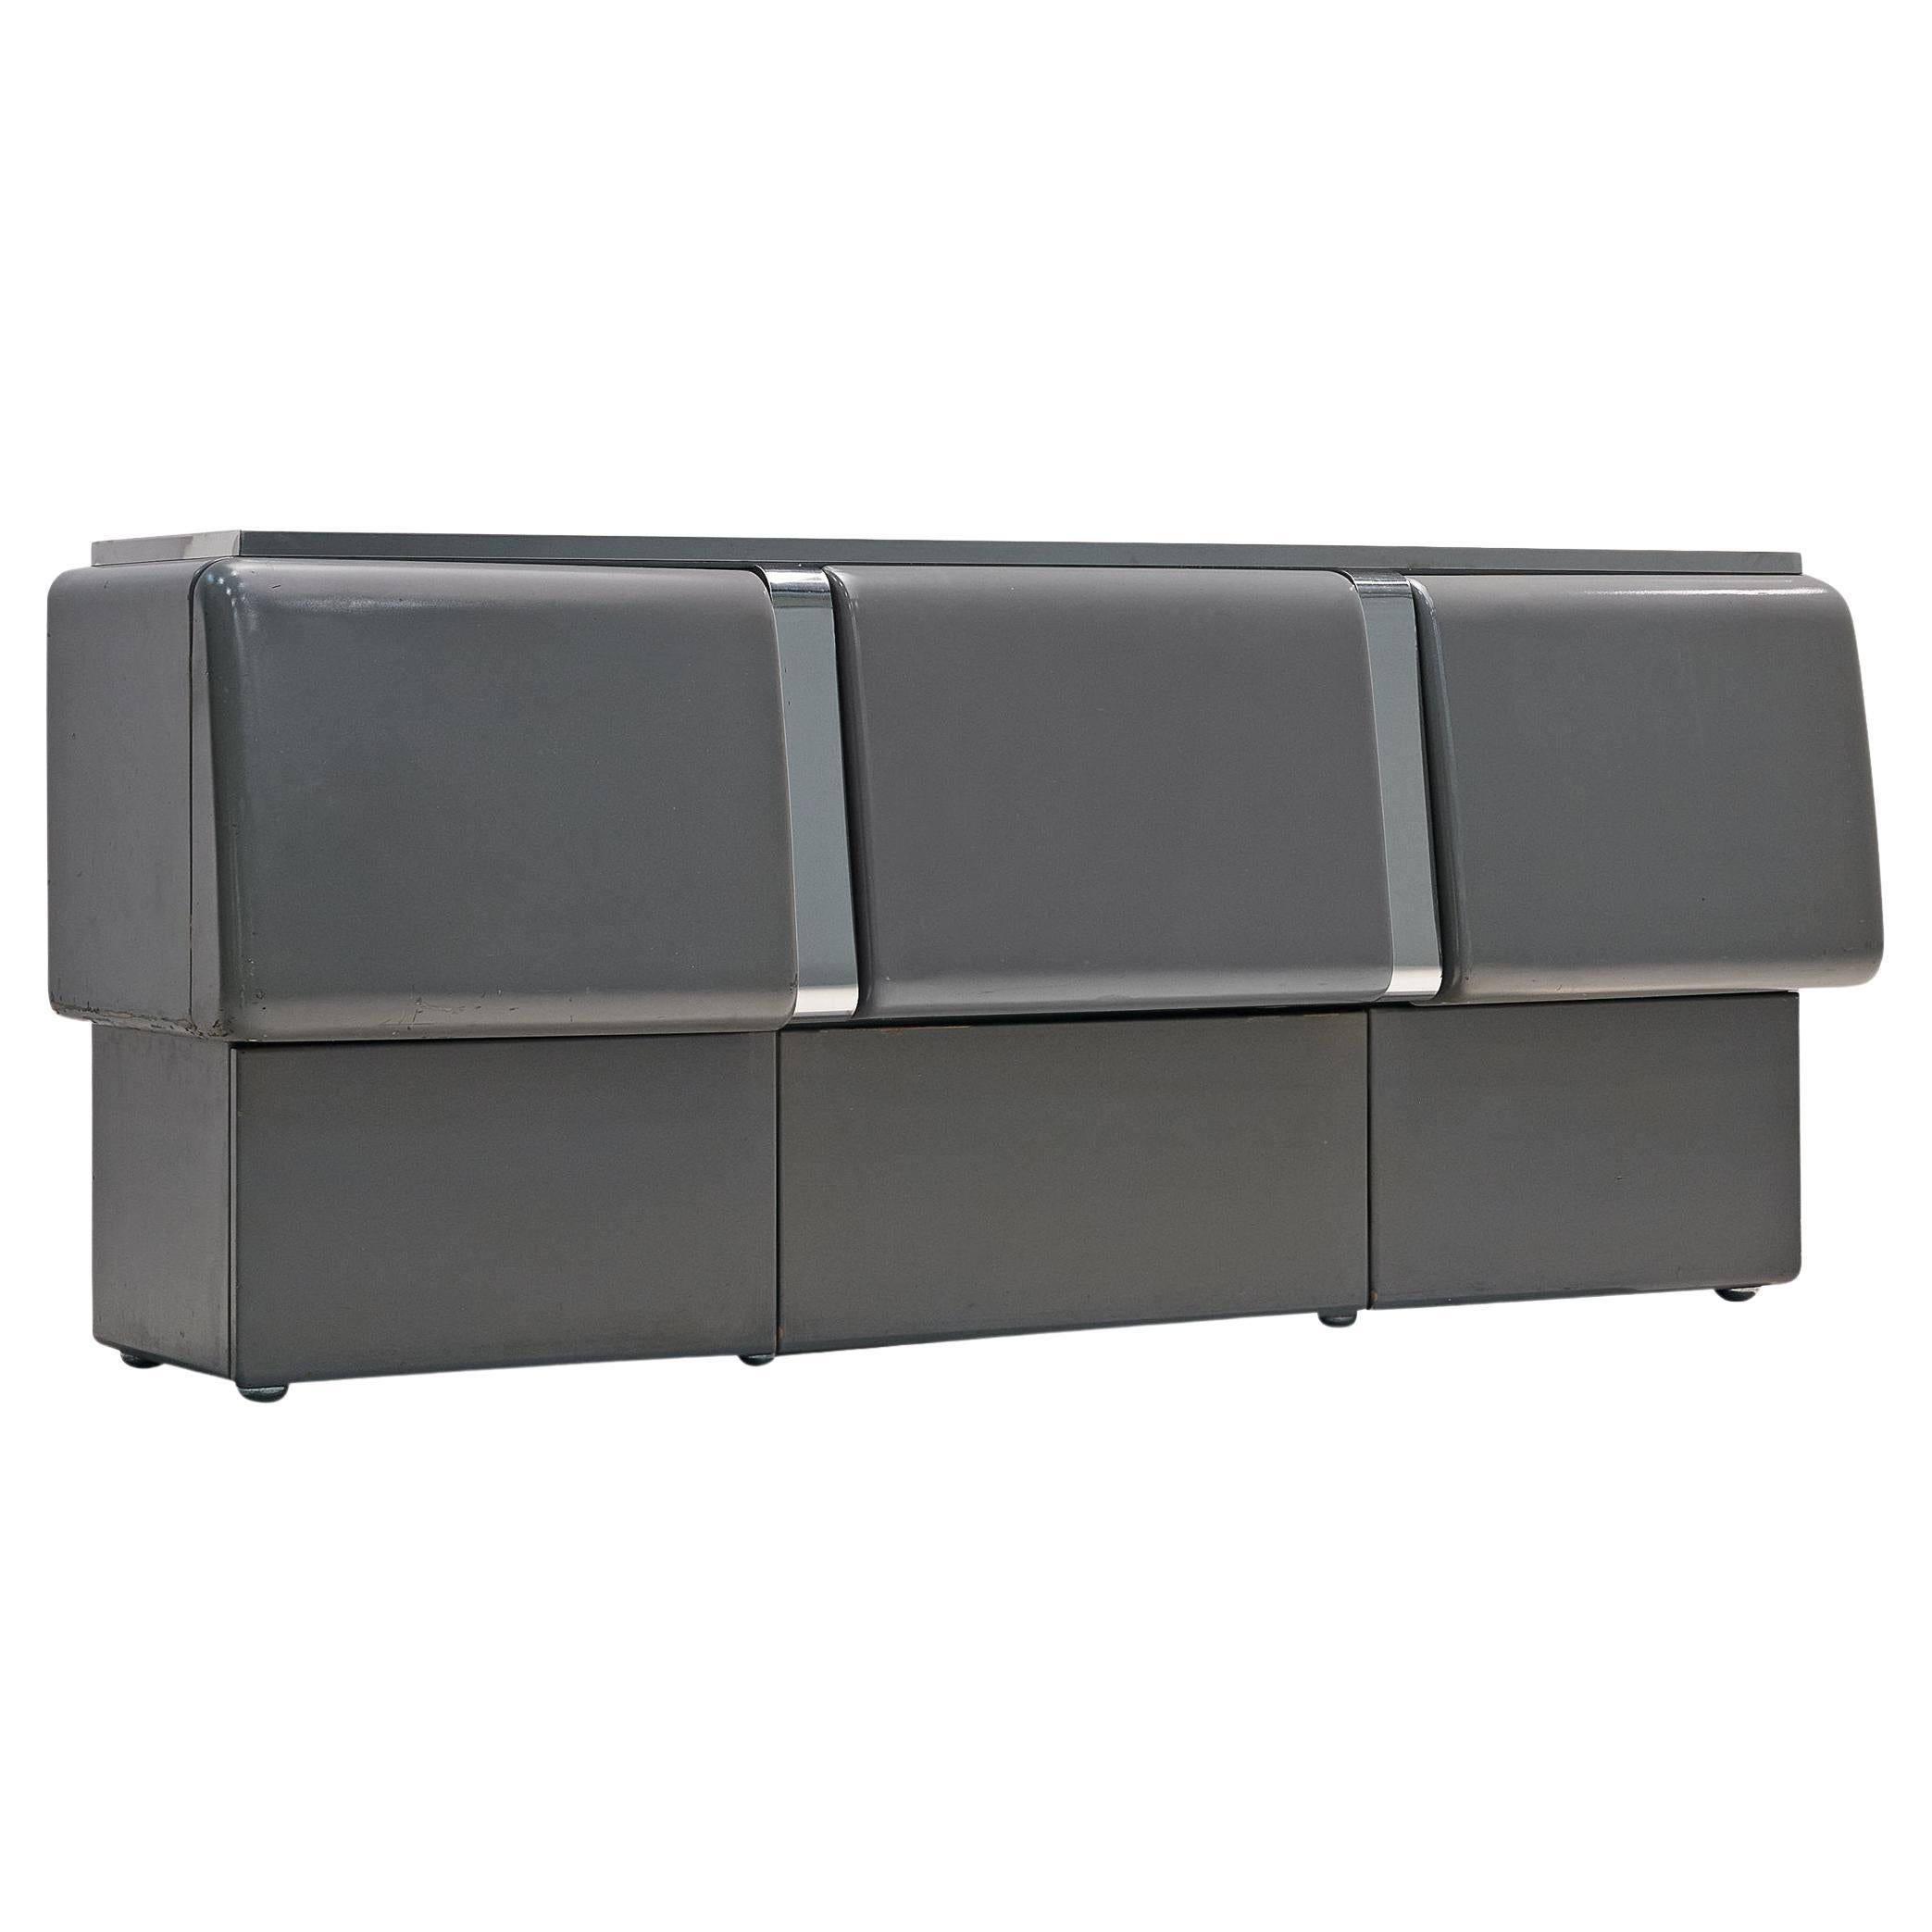 Vittorio Introini for Saporiti 'Colby' Sideboard in Lacquered Wood and Metal